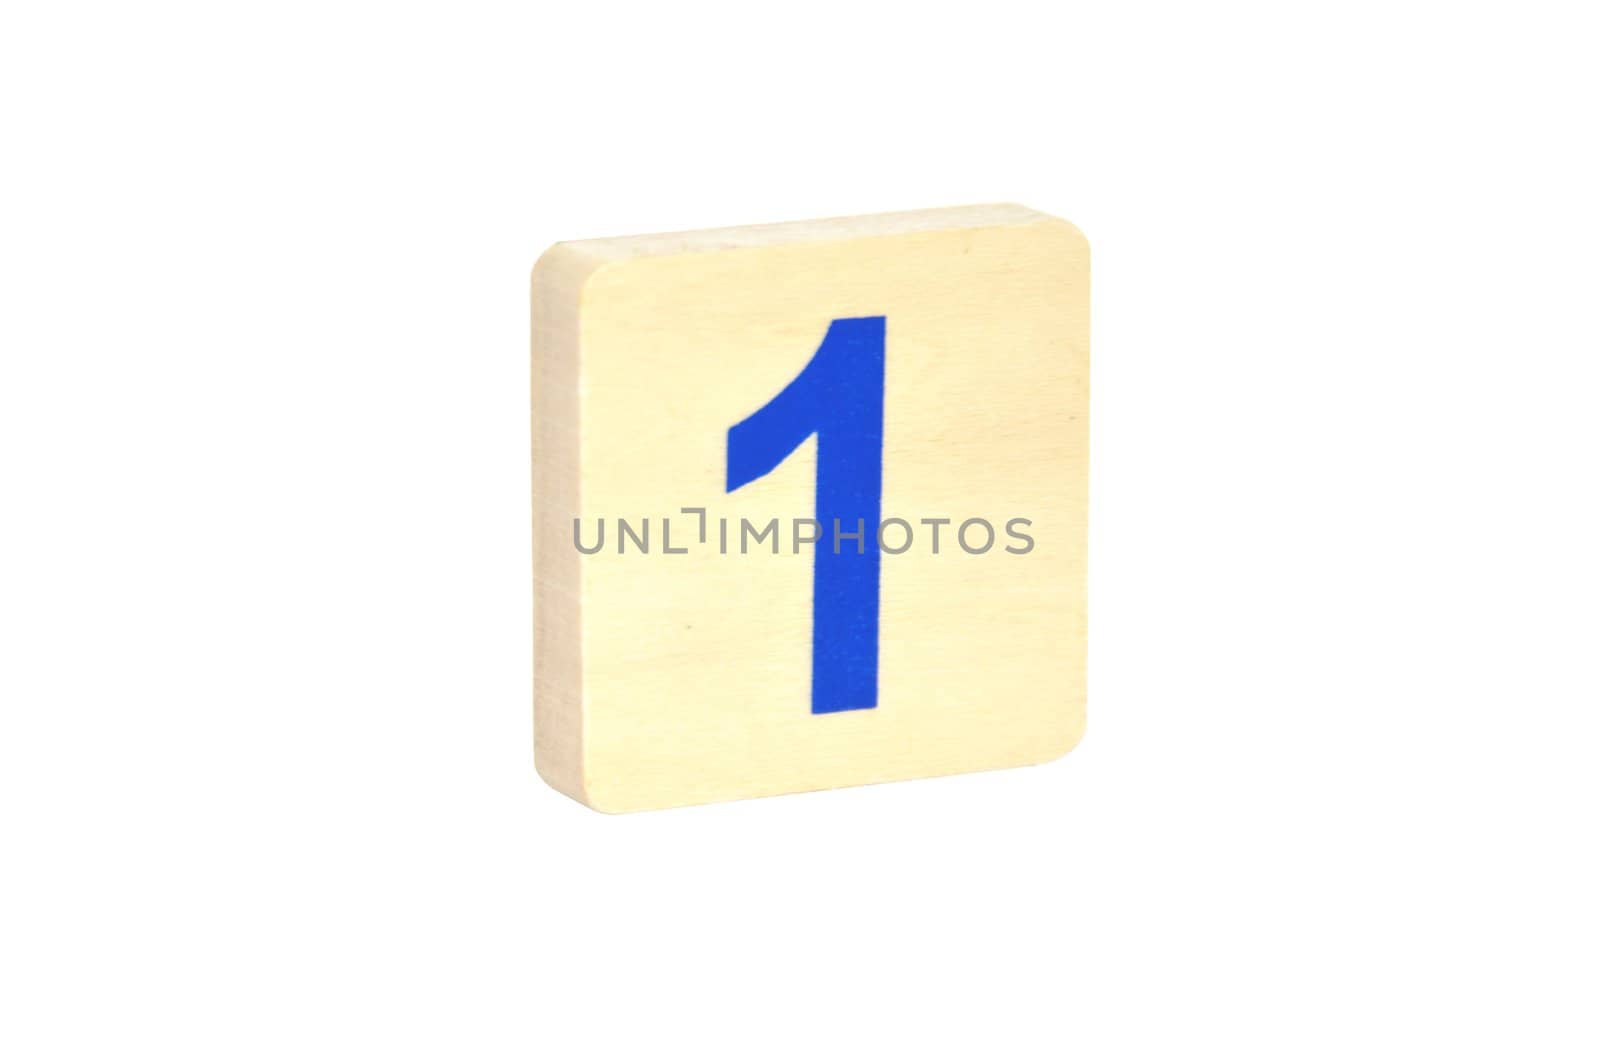 Figure one on a wooden square on a white background